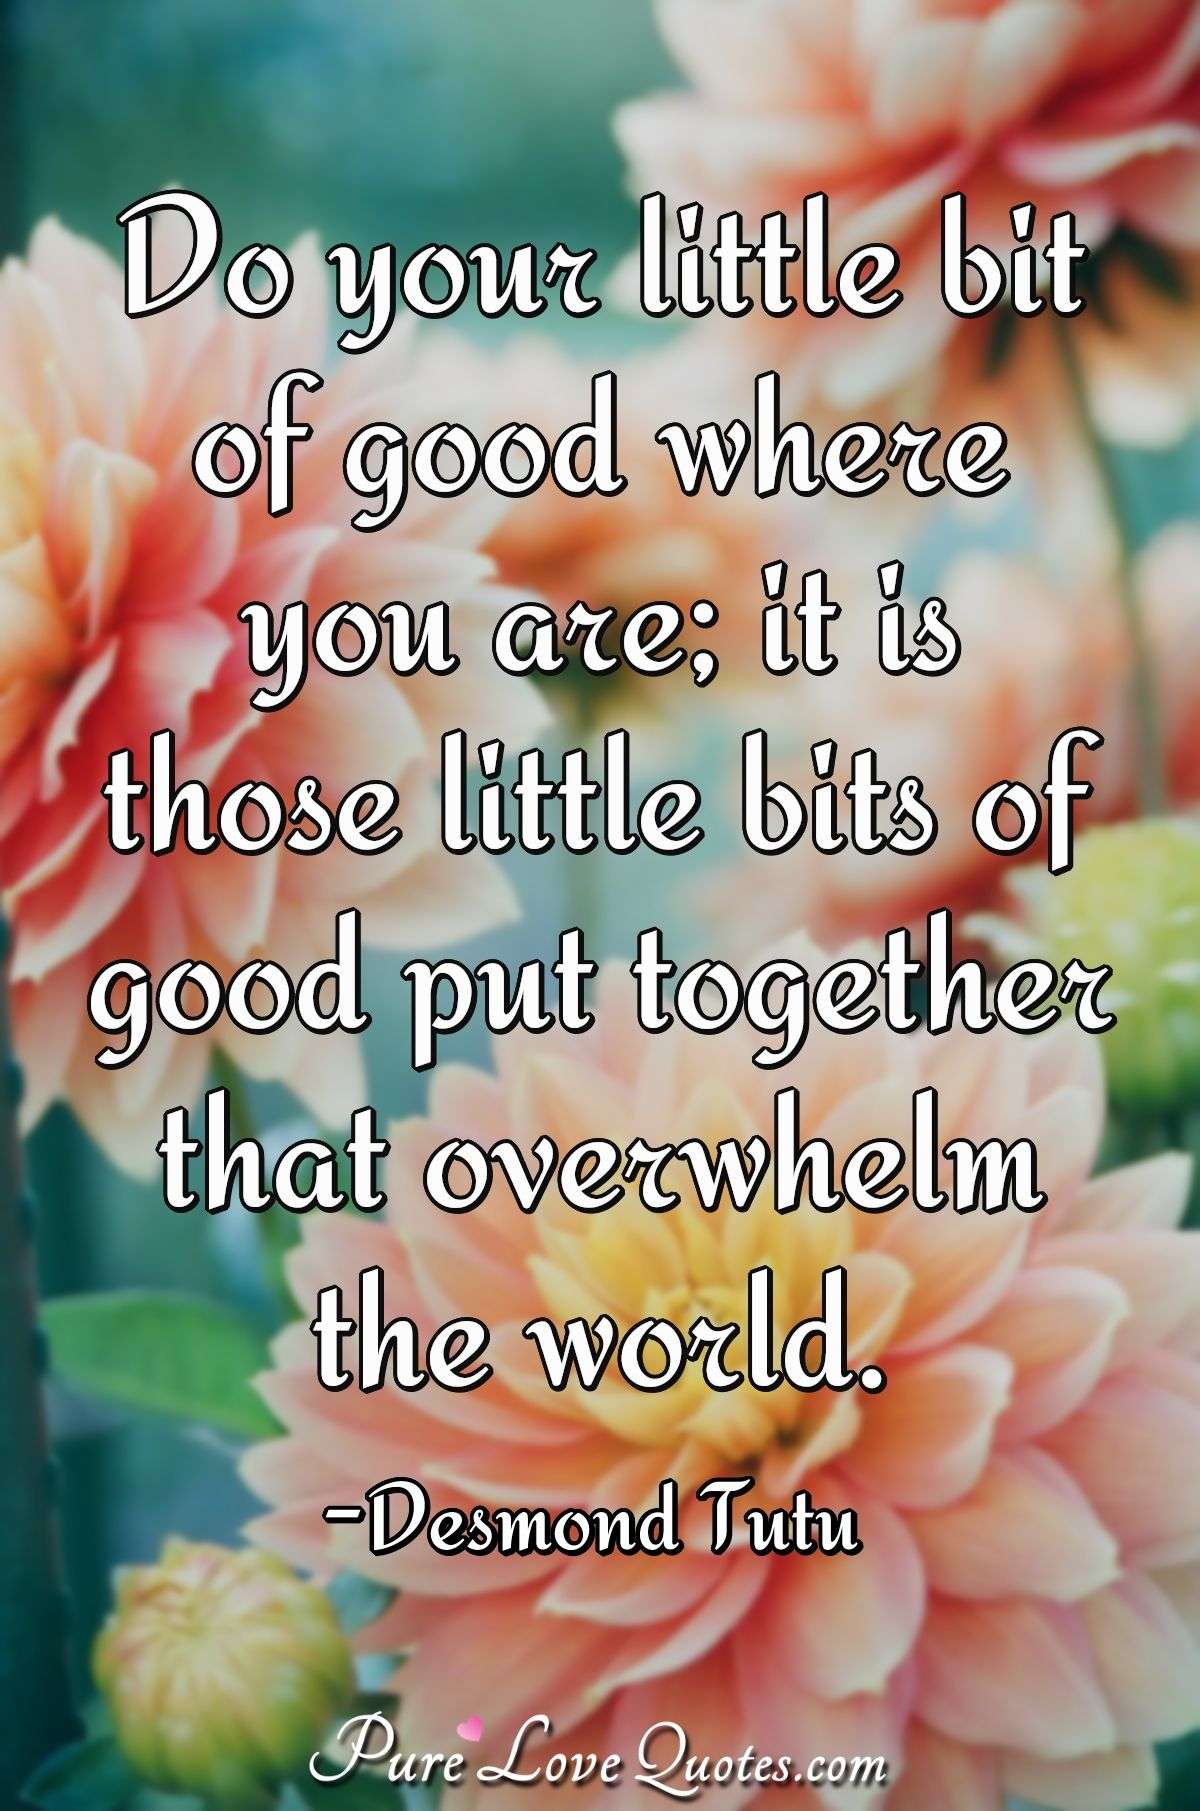 Do your little bit of good where you are; it is those little bits of good put together that overwhelm the world. - Desmond Tutu